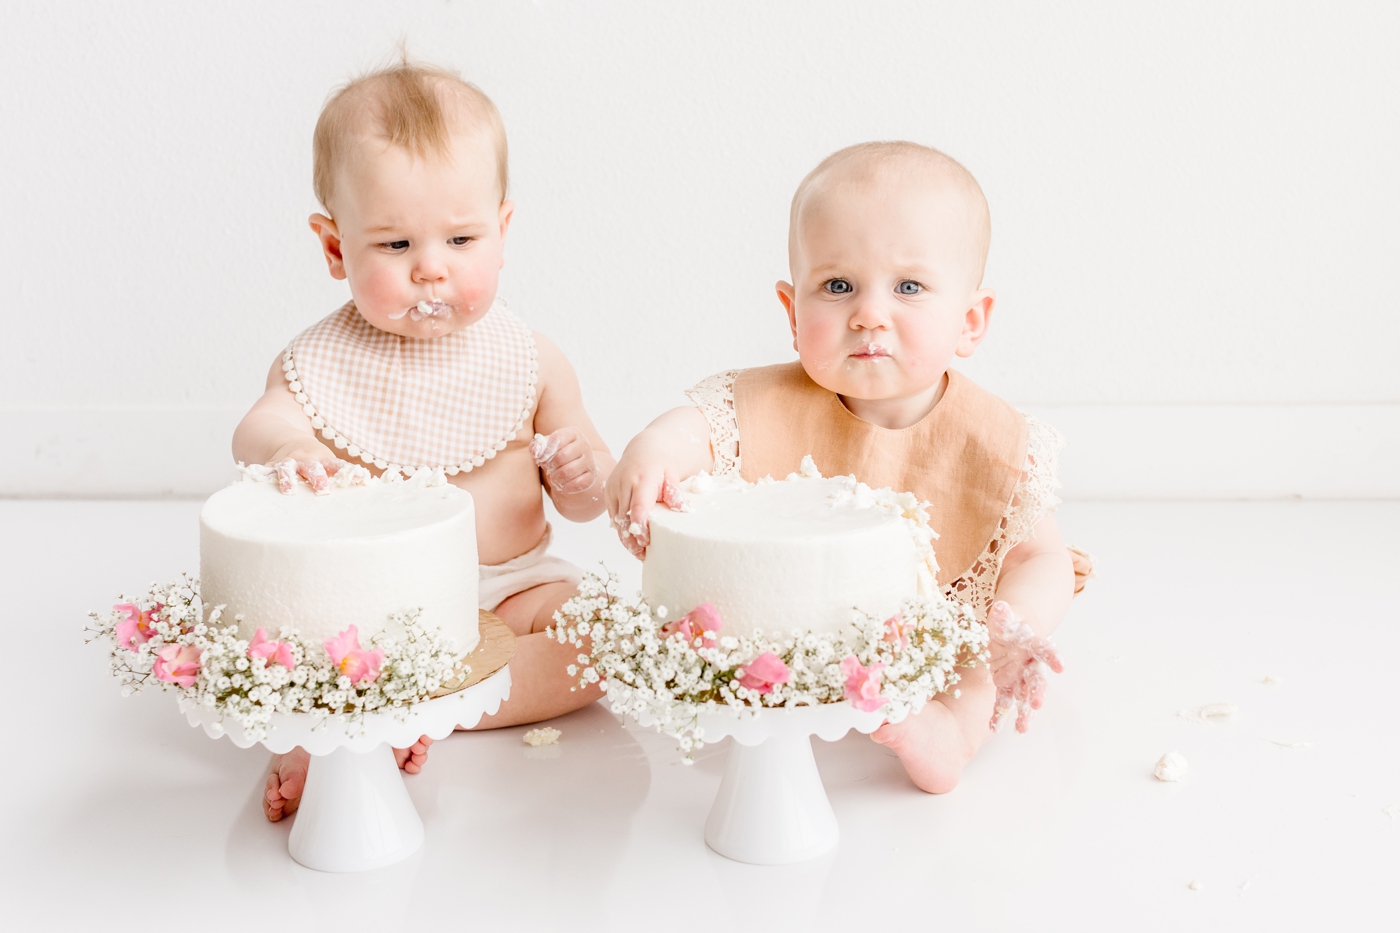 Twins digging into cake during first birthday milestone session in studio. Photo by Sana Ahmed Photography.